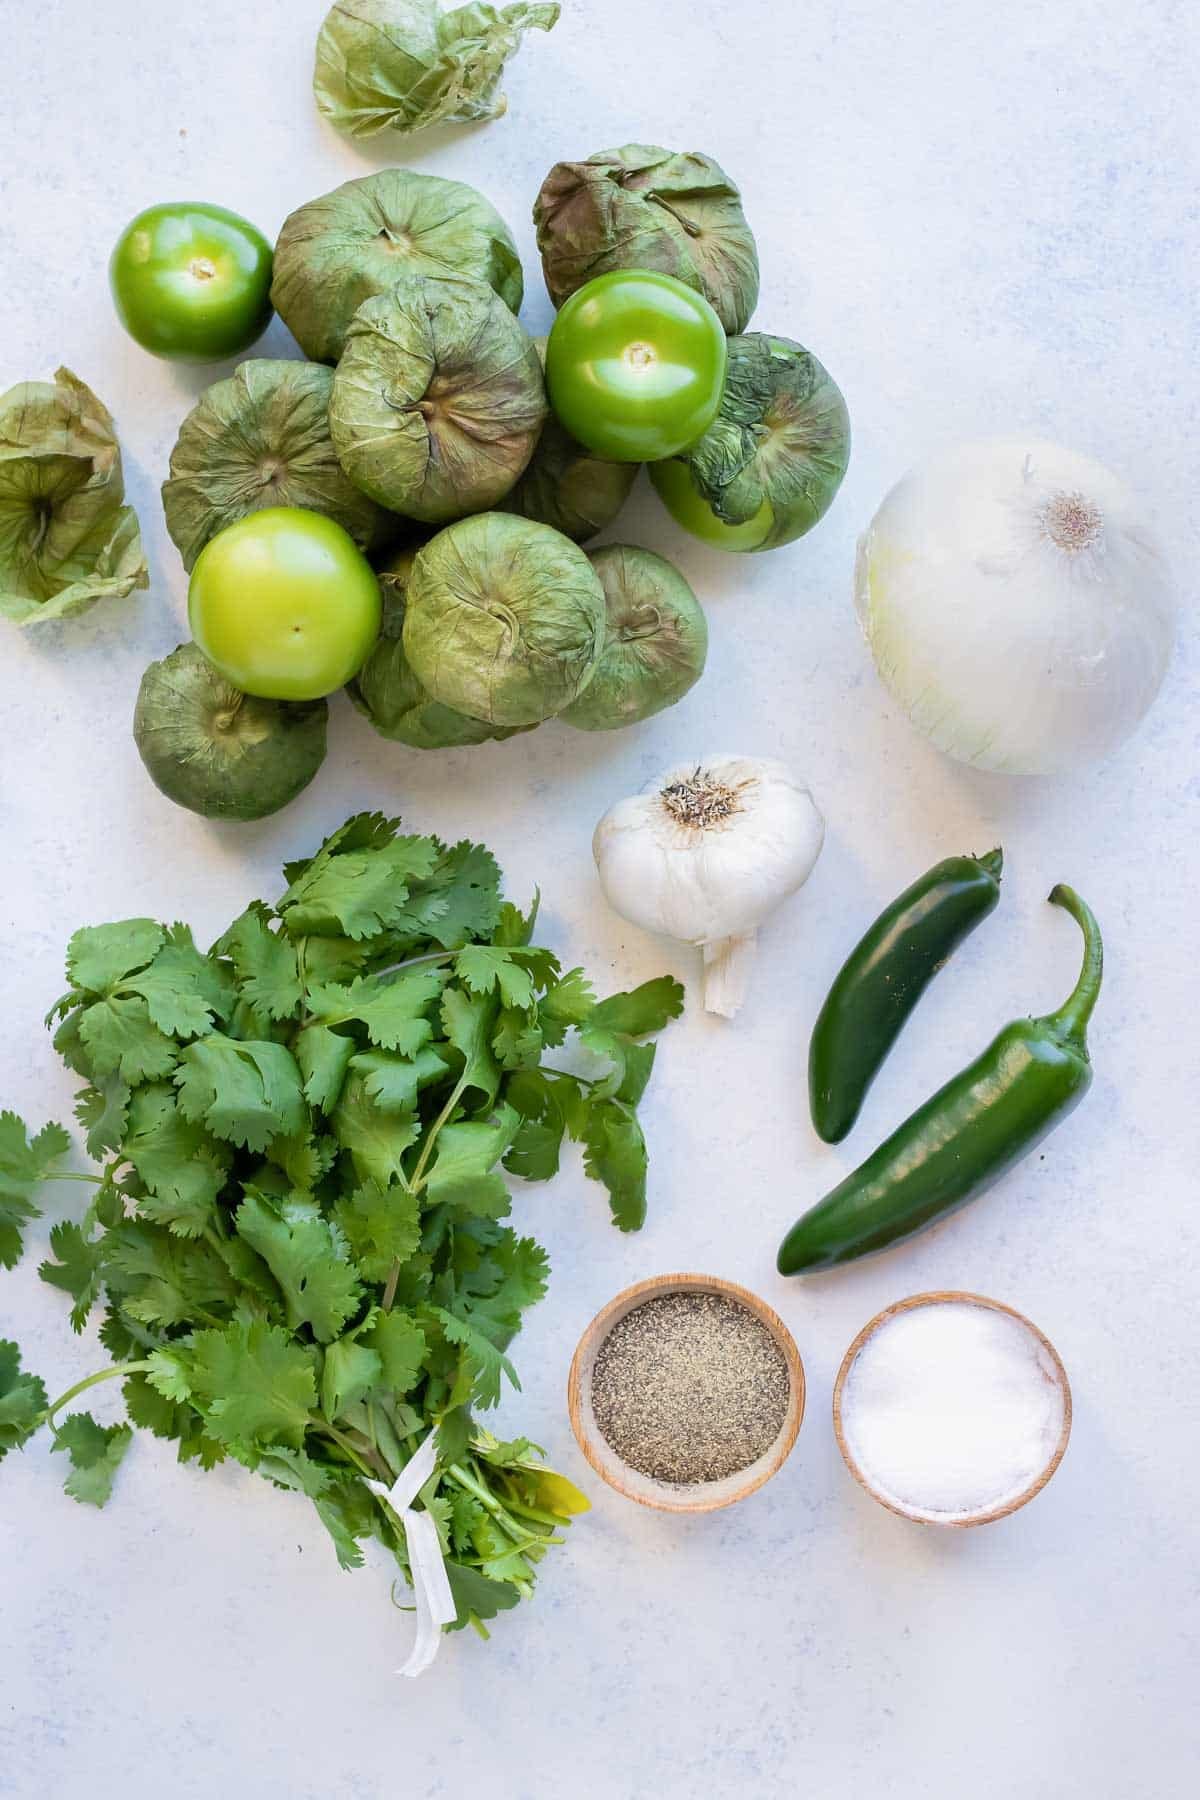 Tomatillos, cilantro, onion, garlic, jalapeño peppers, salt, and pepper are the ingredients for this recipe.